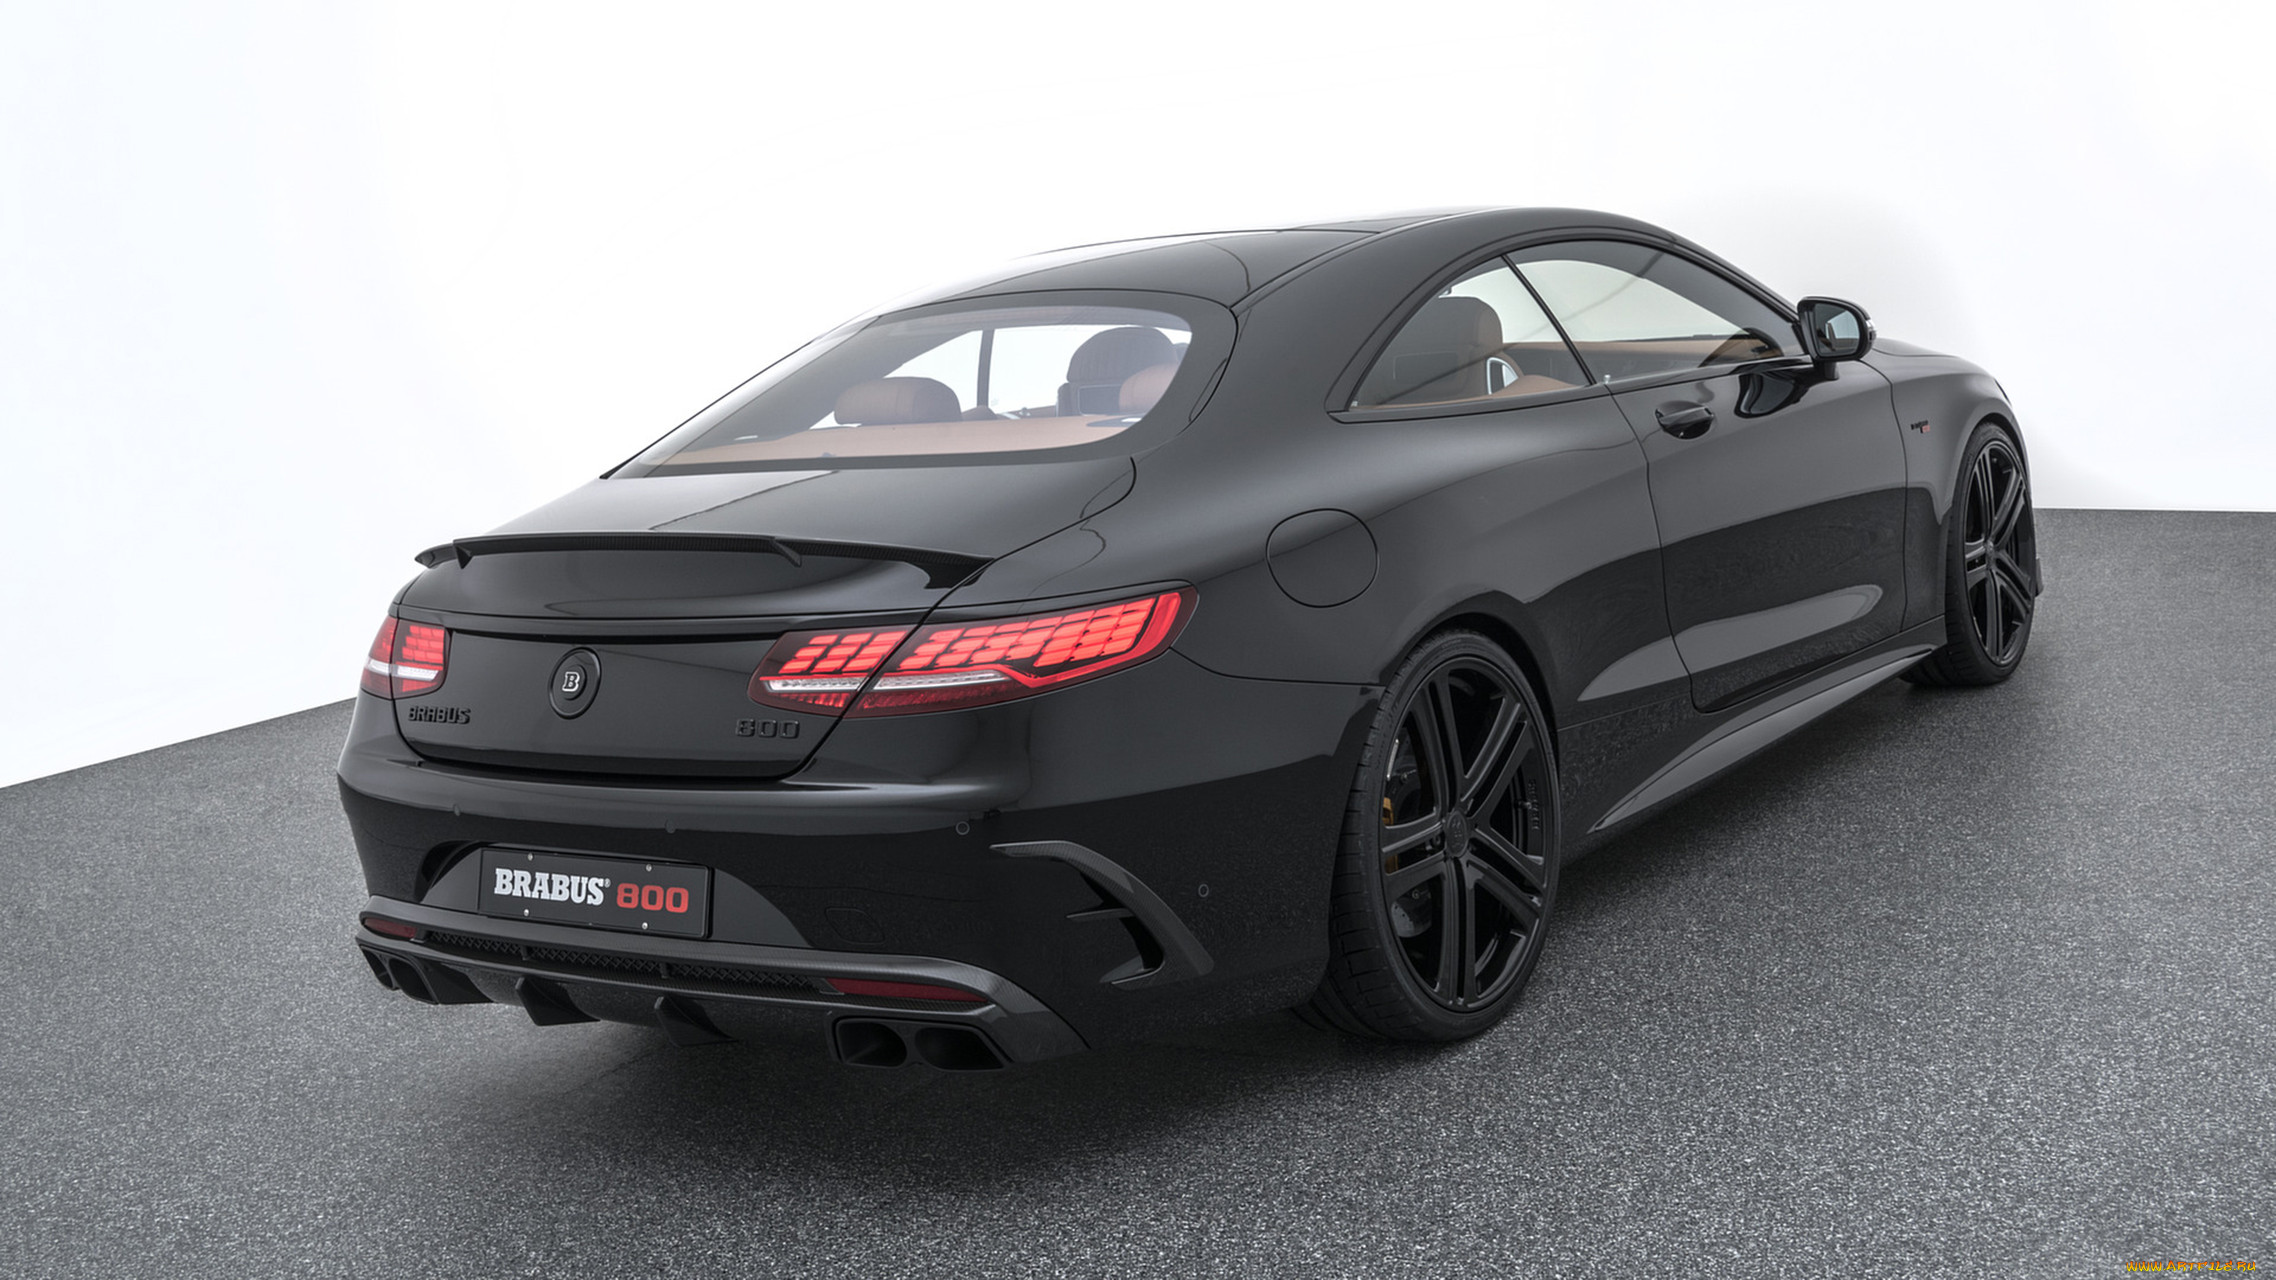 brabus 800 coupe based on mercedes-benz amg s-63 4matic coupe 2018, , brabus, mercedes-benz, based, 2018, coupe, 800, 4matic, s-63, amg